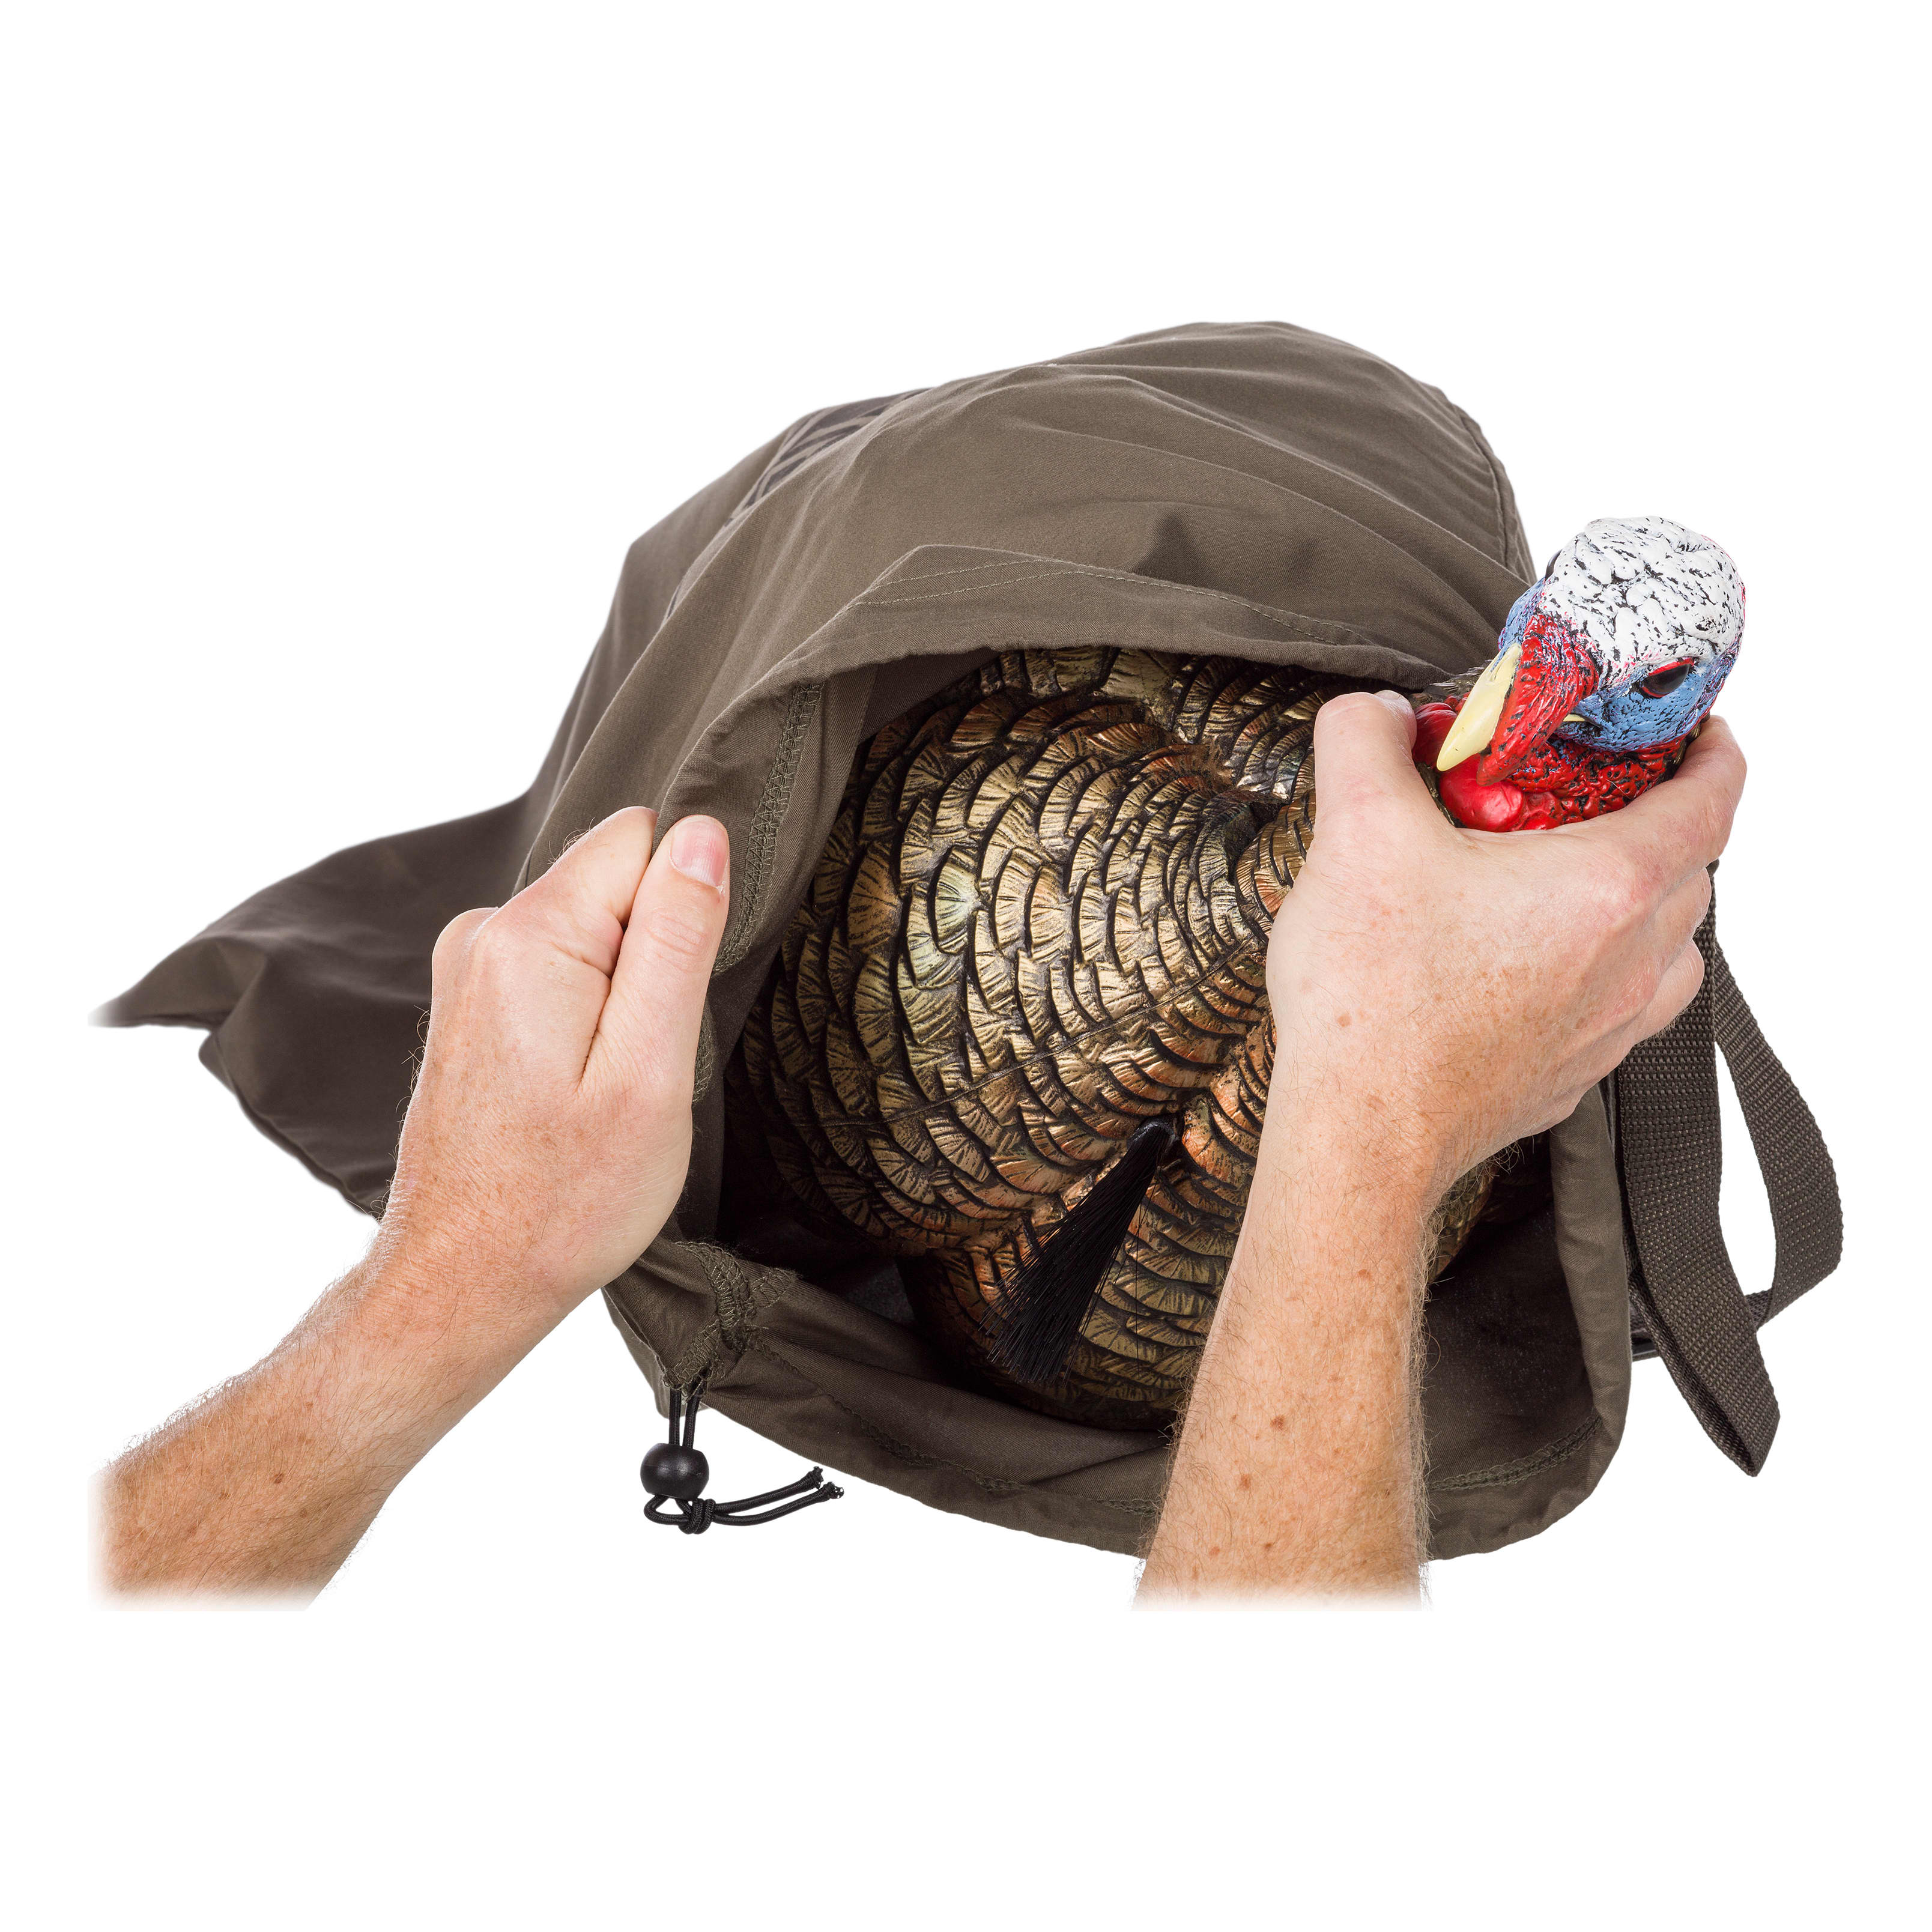 Avian-X HDR Jake and Hen Turkey Decoy Combo - Carry Bag View